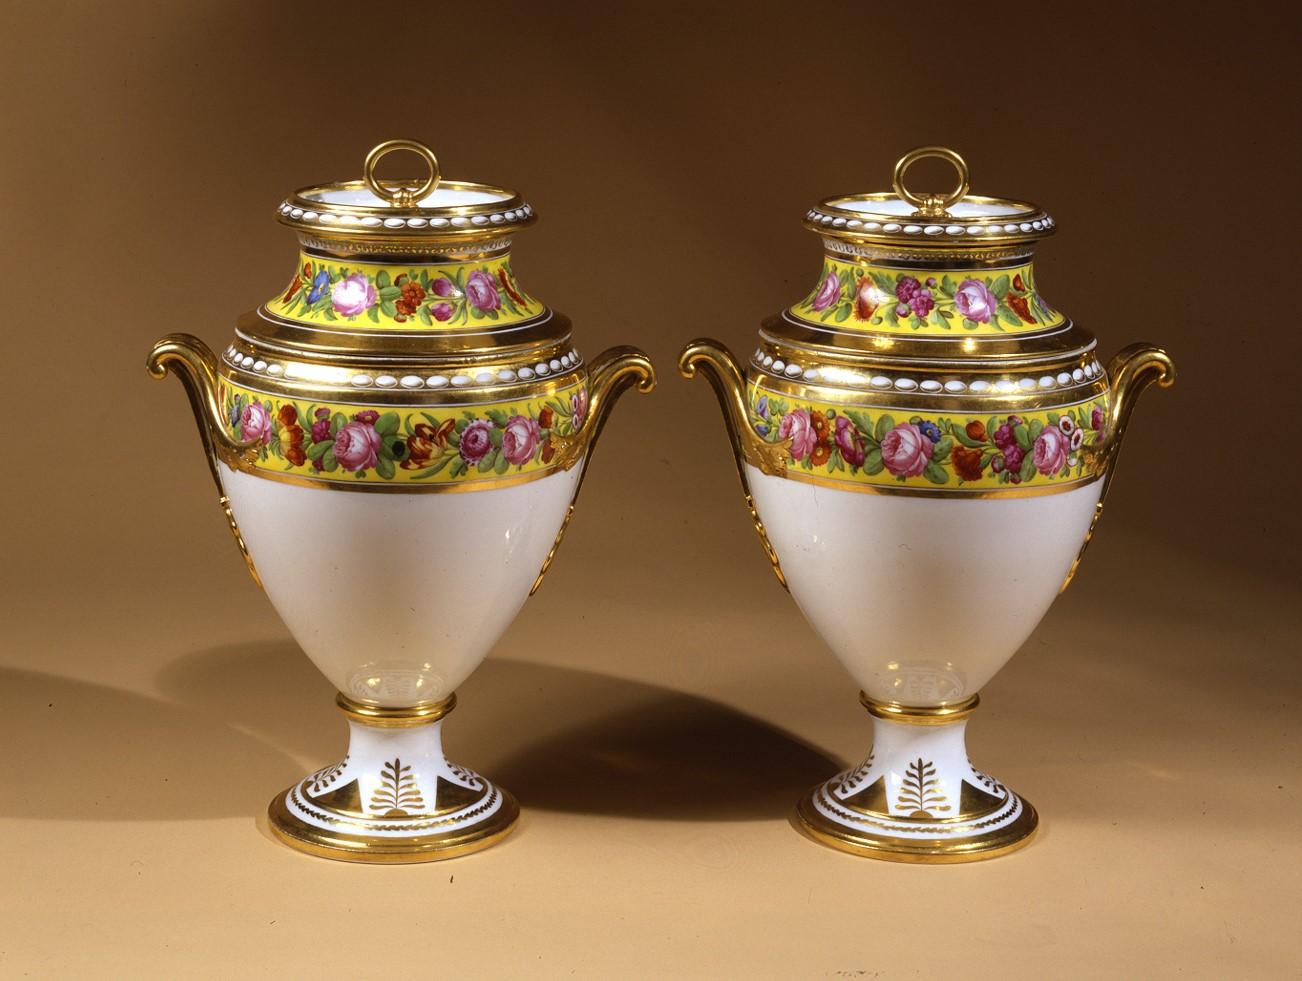 Darte Frères, Paris, made, circa 1820.
Porcelain, partially painted and gilded.
Measures: 14 1/4 in. high, 10 3/8 in. wide (through the handles), 7 3/4 in. deep.
Signed (with stencil, in black, on the bottom of each): Darte. f.

Recorded: cf.